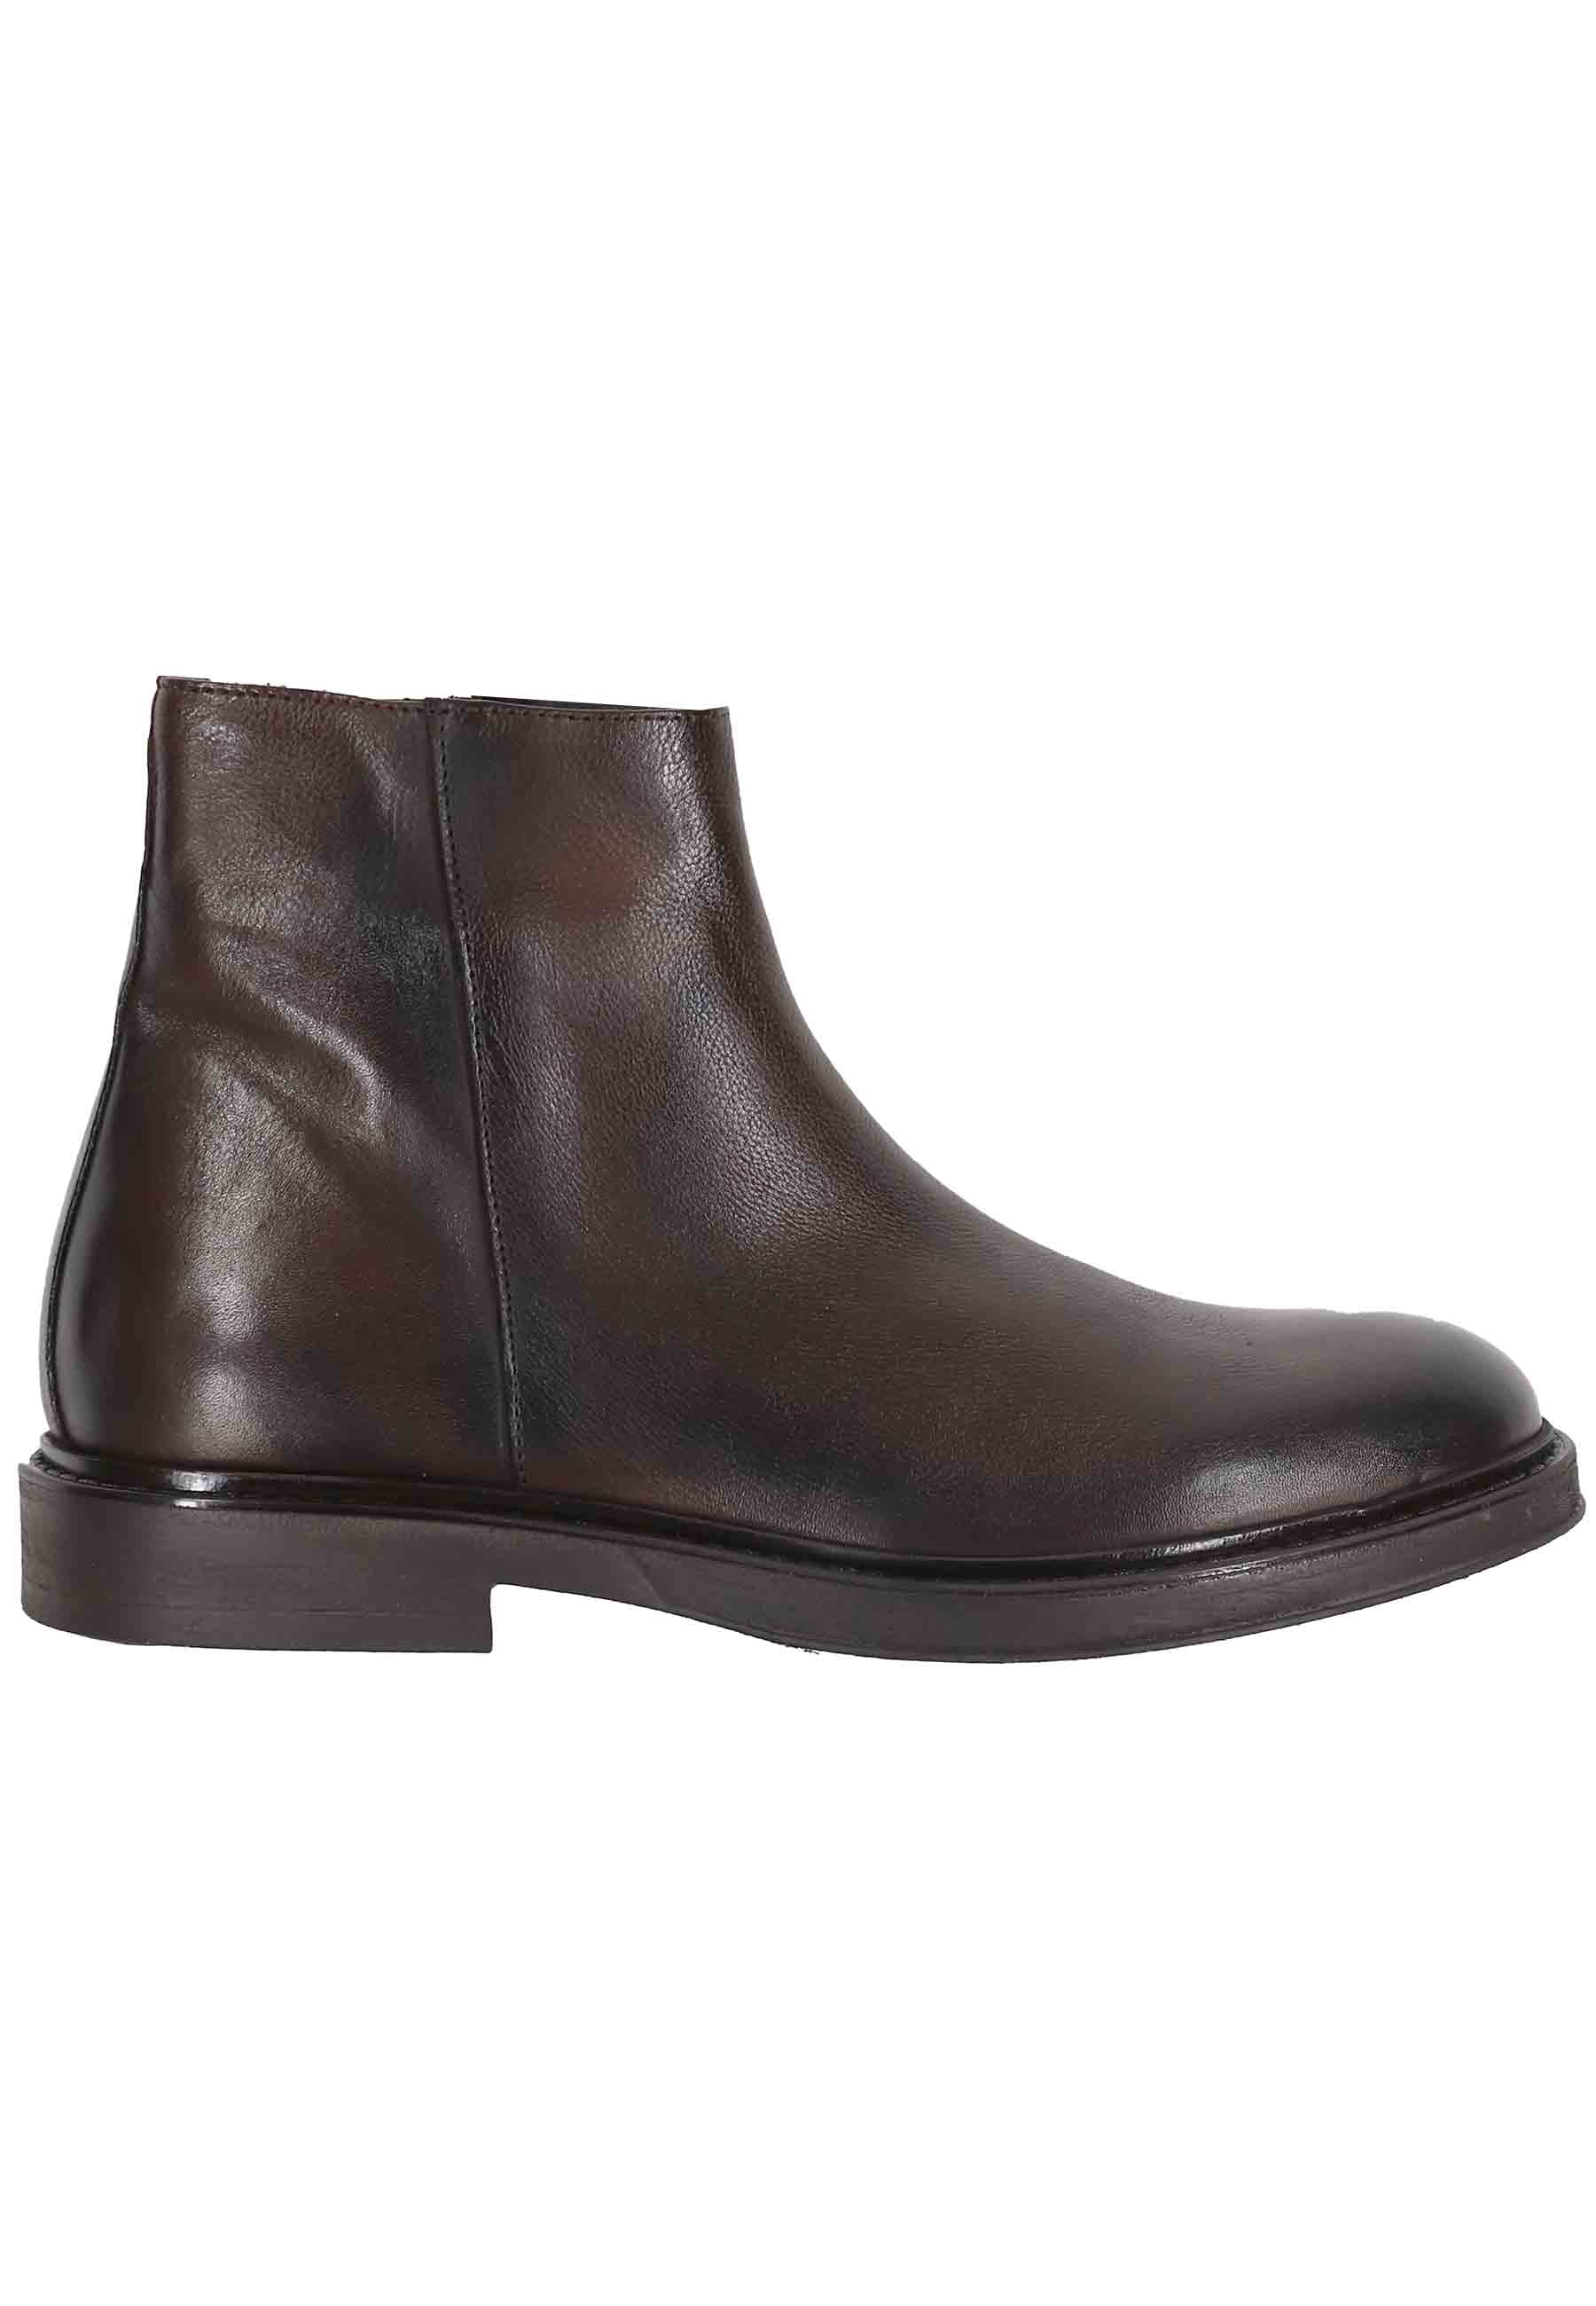 Men's ankle boots in dark brown leather with side zip and rubber sole